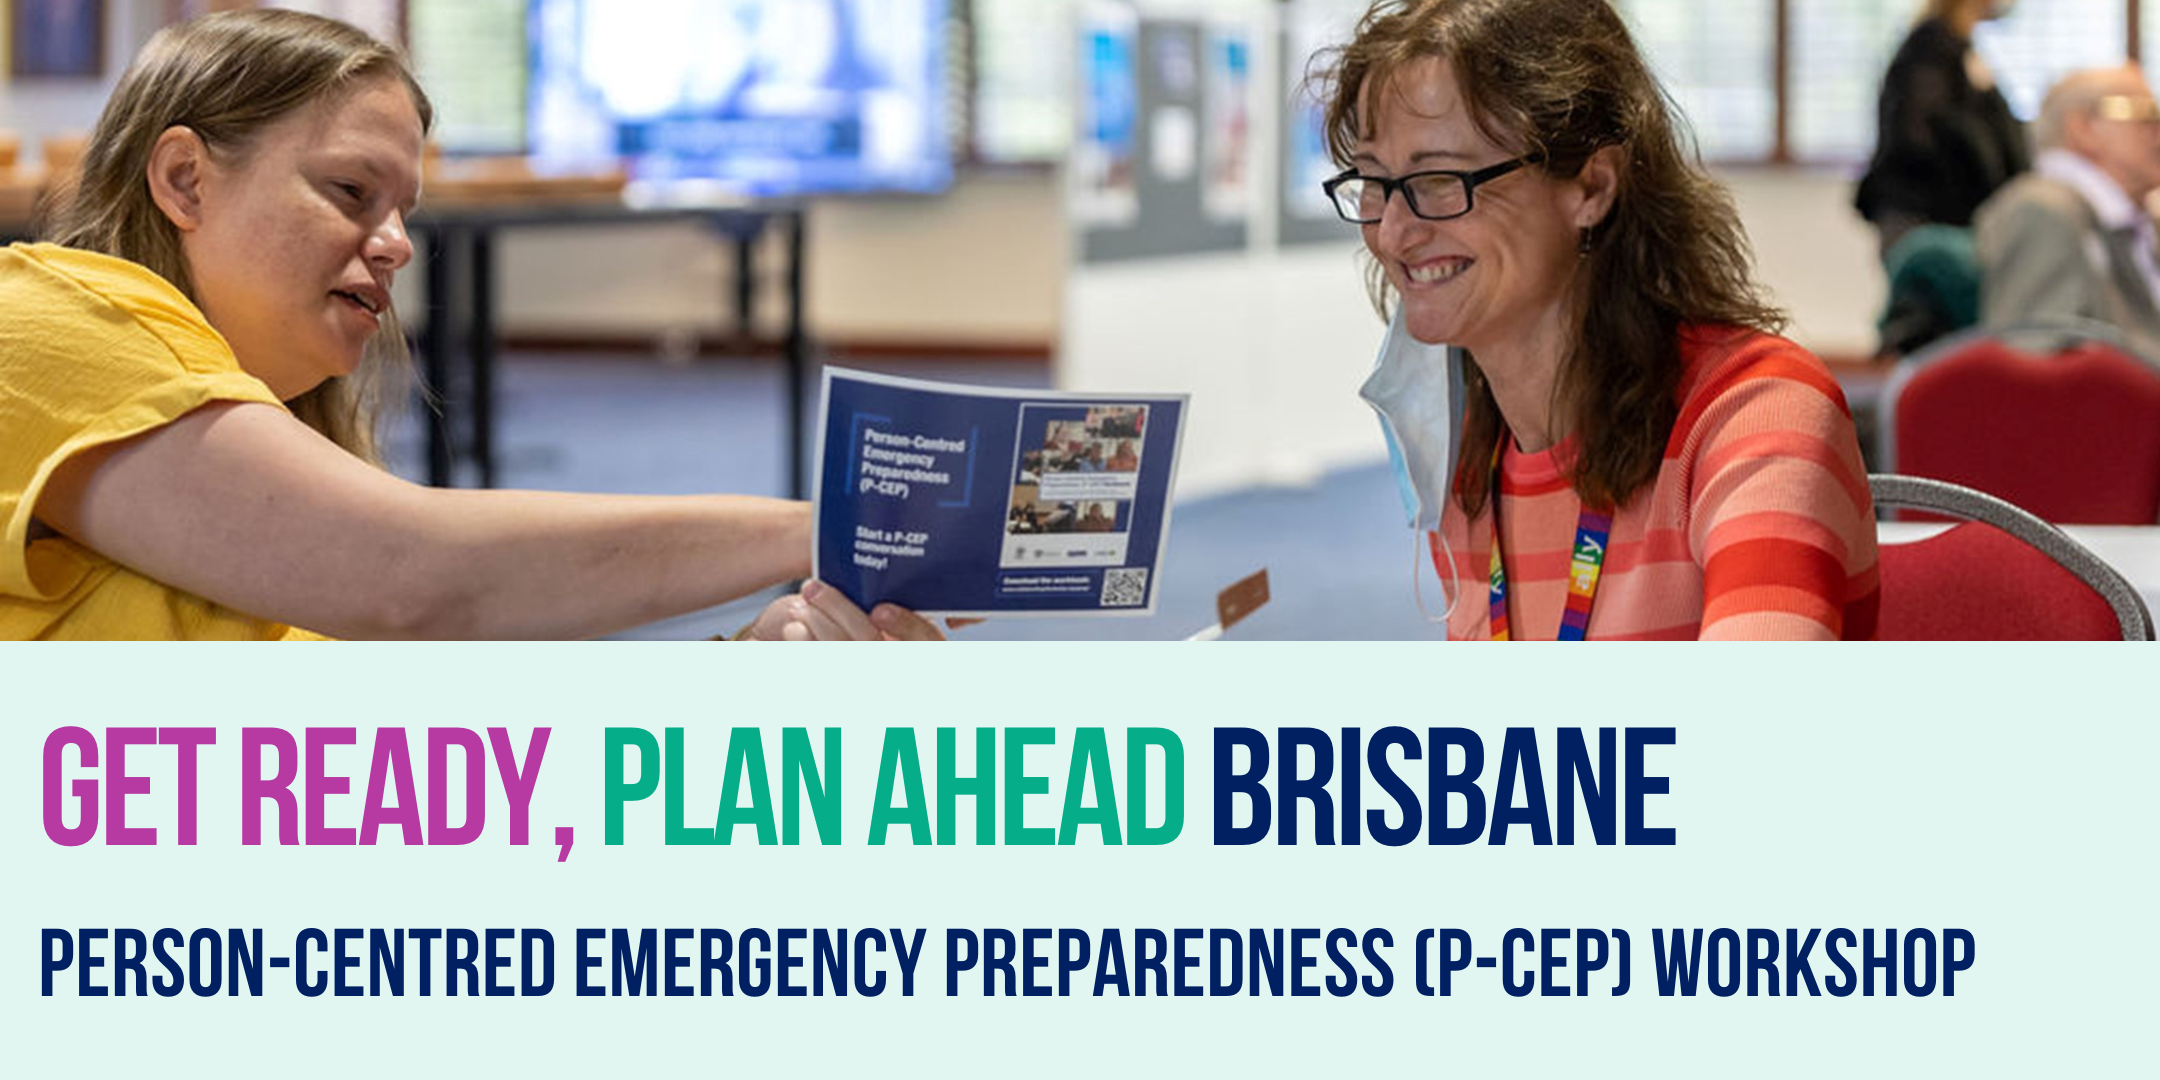 Alt Text: Two women with disability engage in a discussion during a workshop. The image is related to the "Get ready, Plan Ahead Brisbane. Person-Centred Emergency Preparedness (P-CEP) Workshop